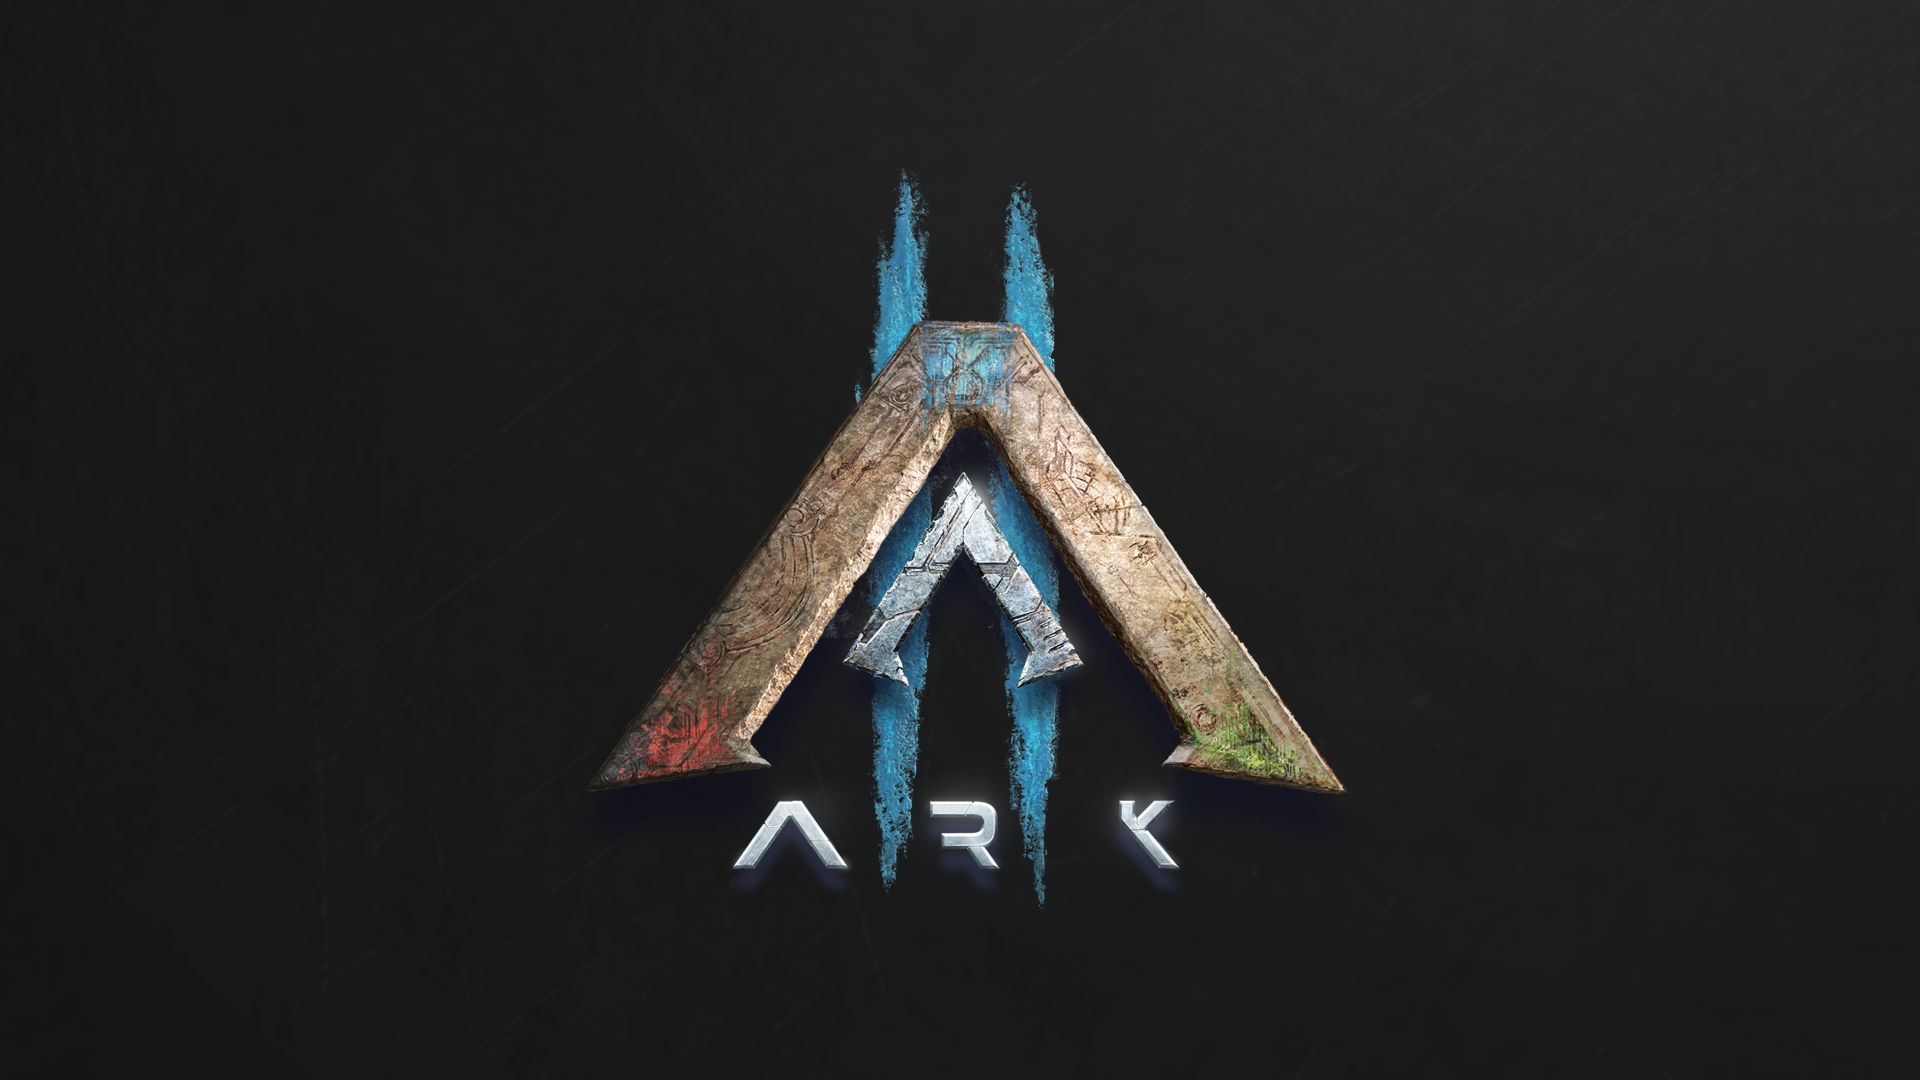 ARK 2 plans for coming to PlayStation, Switch and Mobile - ARK 2 - ARK -  Official Community Forums